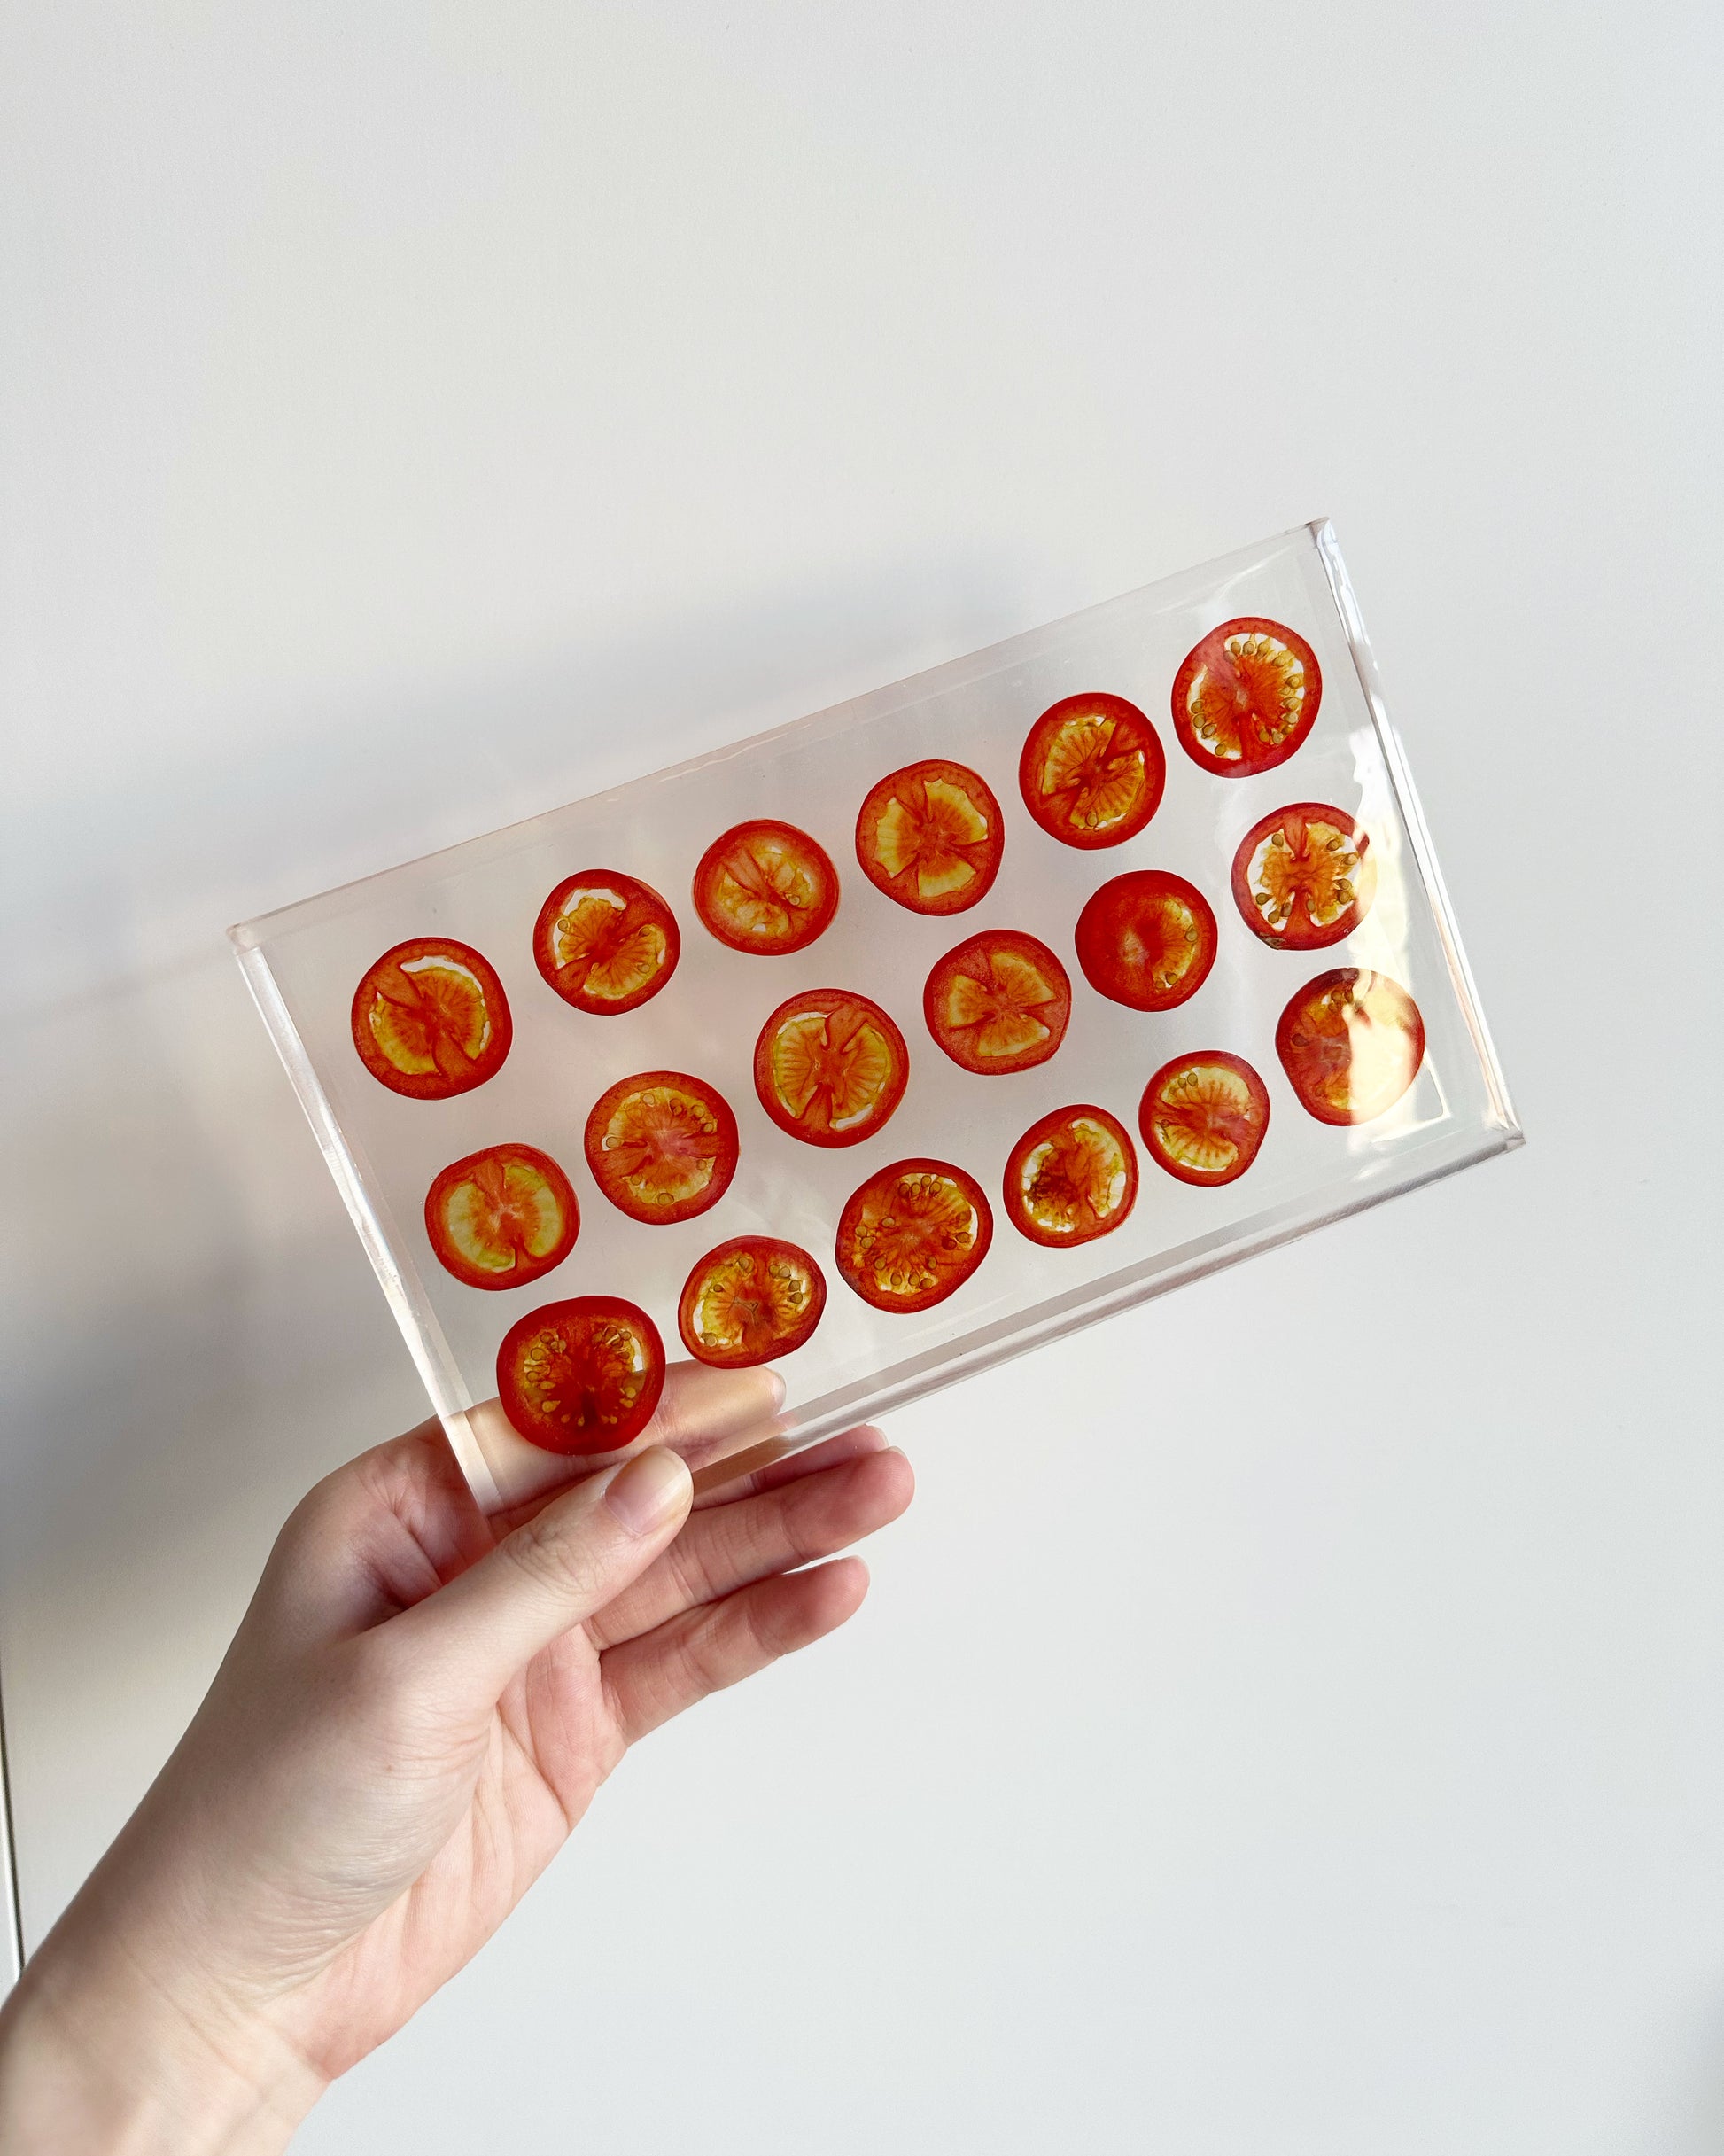 Tomatoes sit suspended in transparent resin tray